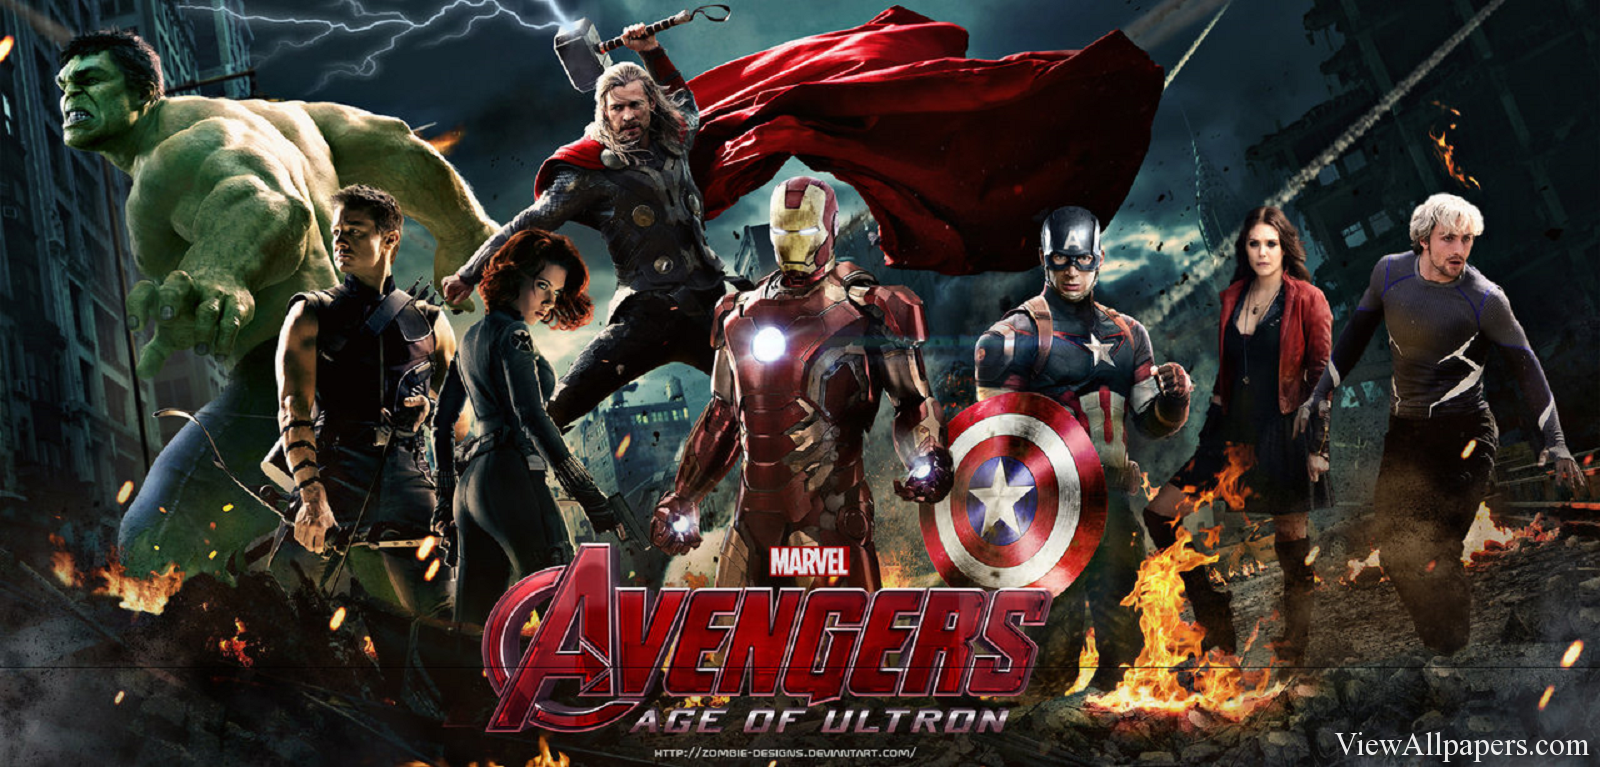 Avengers Age Of Ultron Poster High Resolution Wallpaper Free download